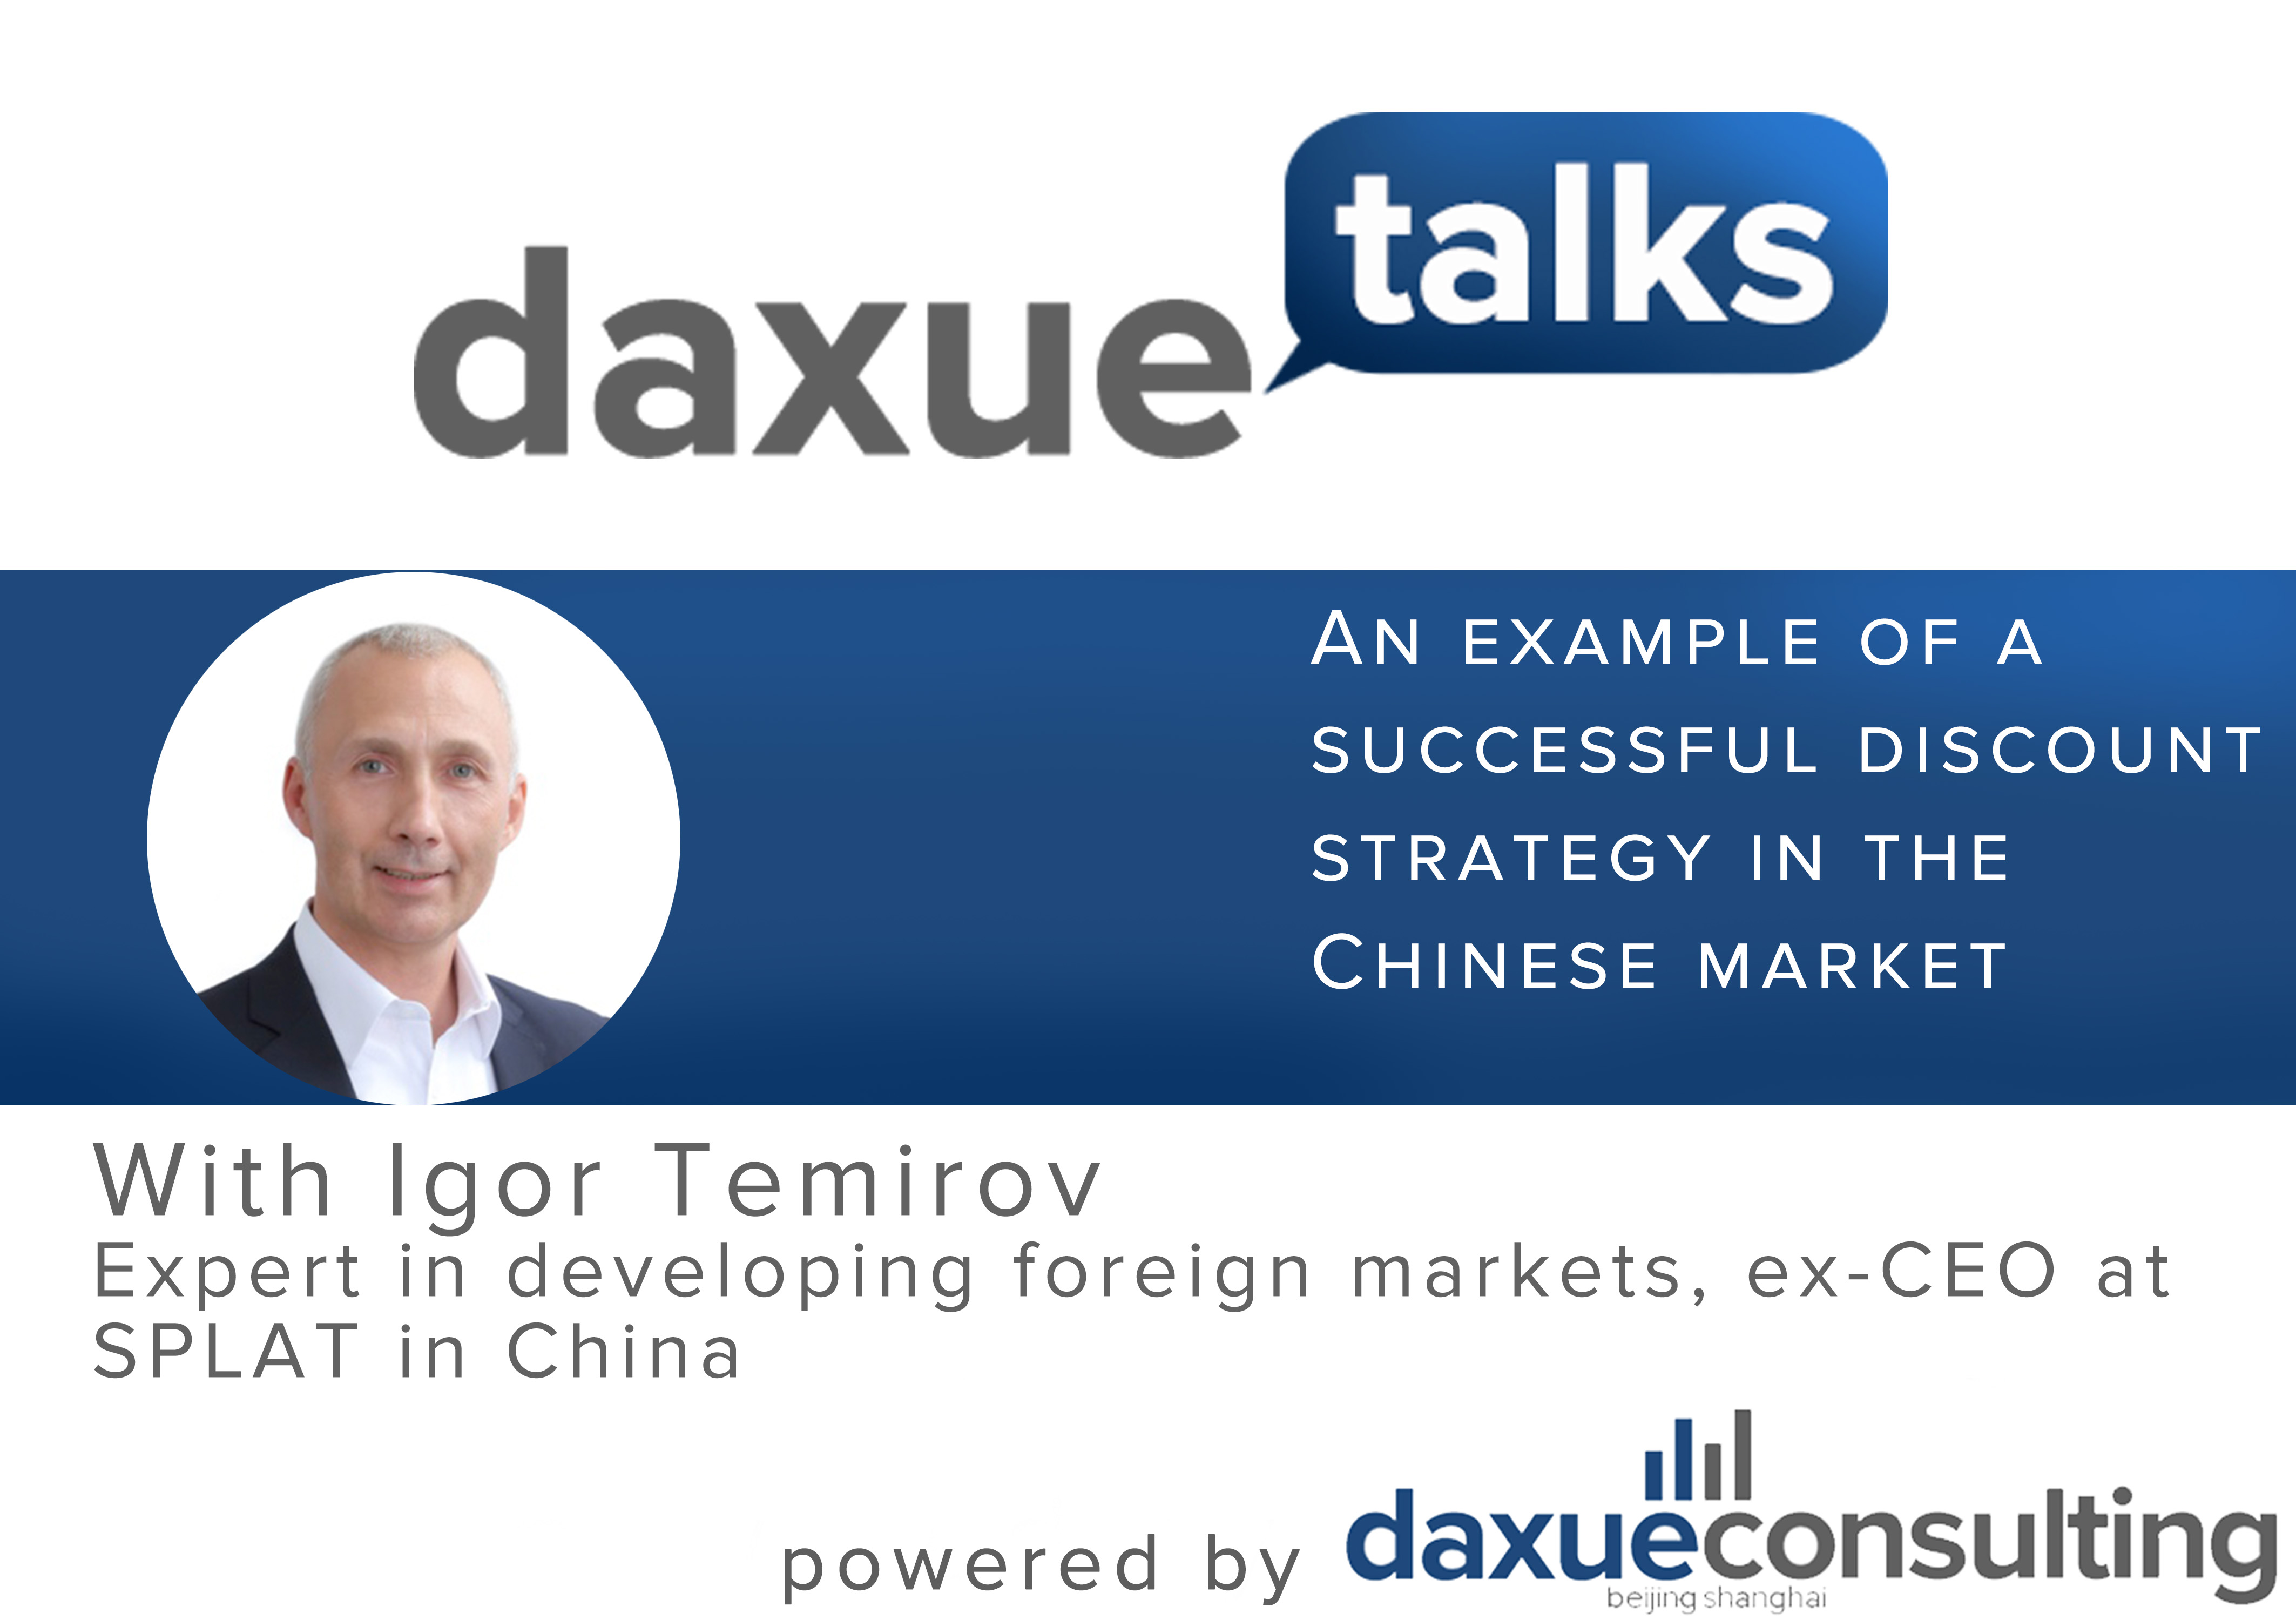 Daxue Talks 21: An example of a successful discount strategy in the Chinese market